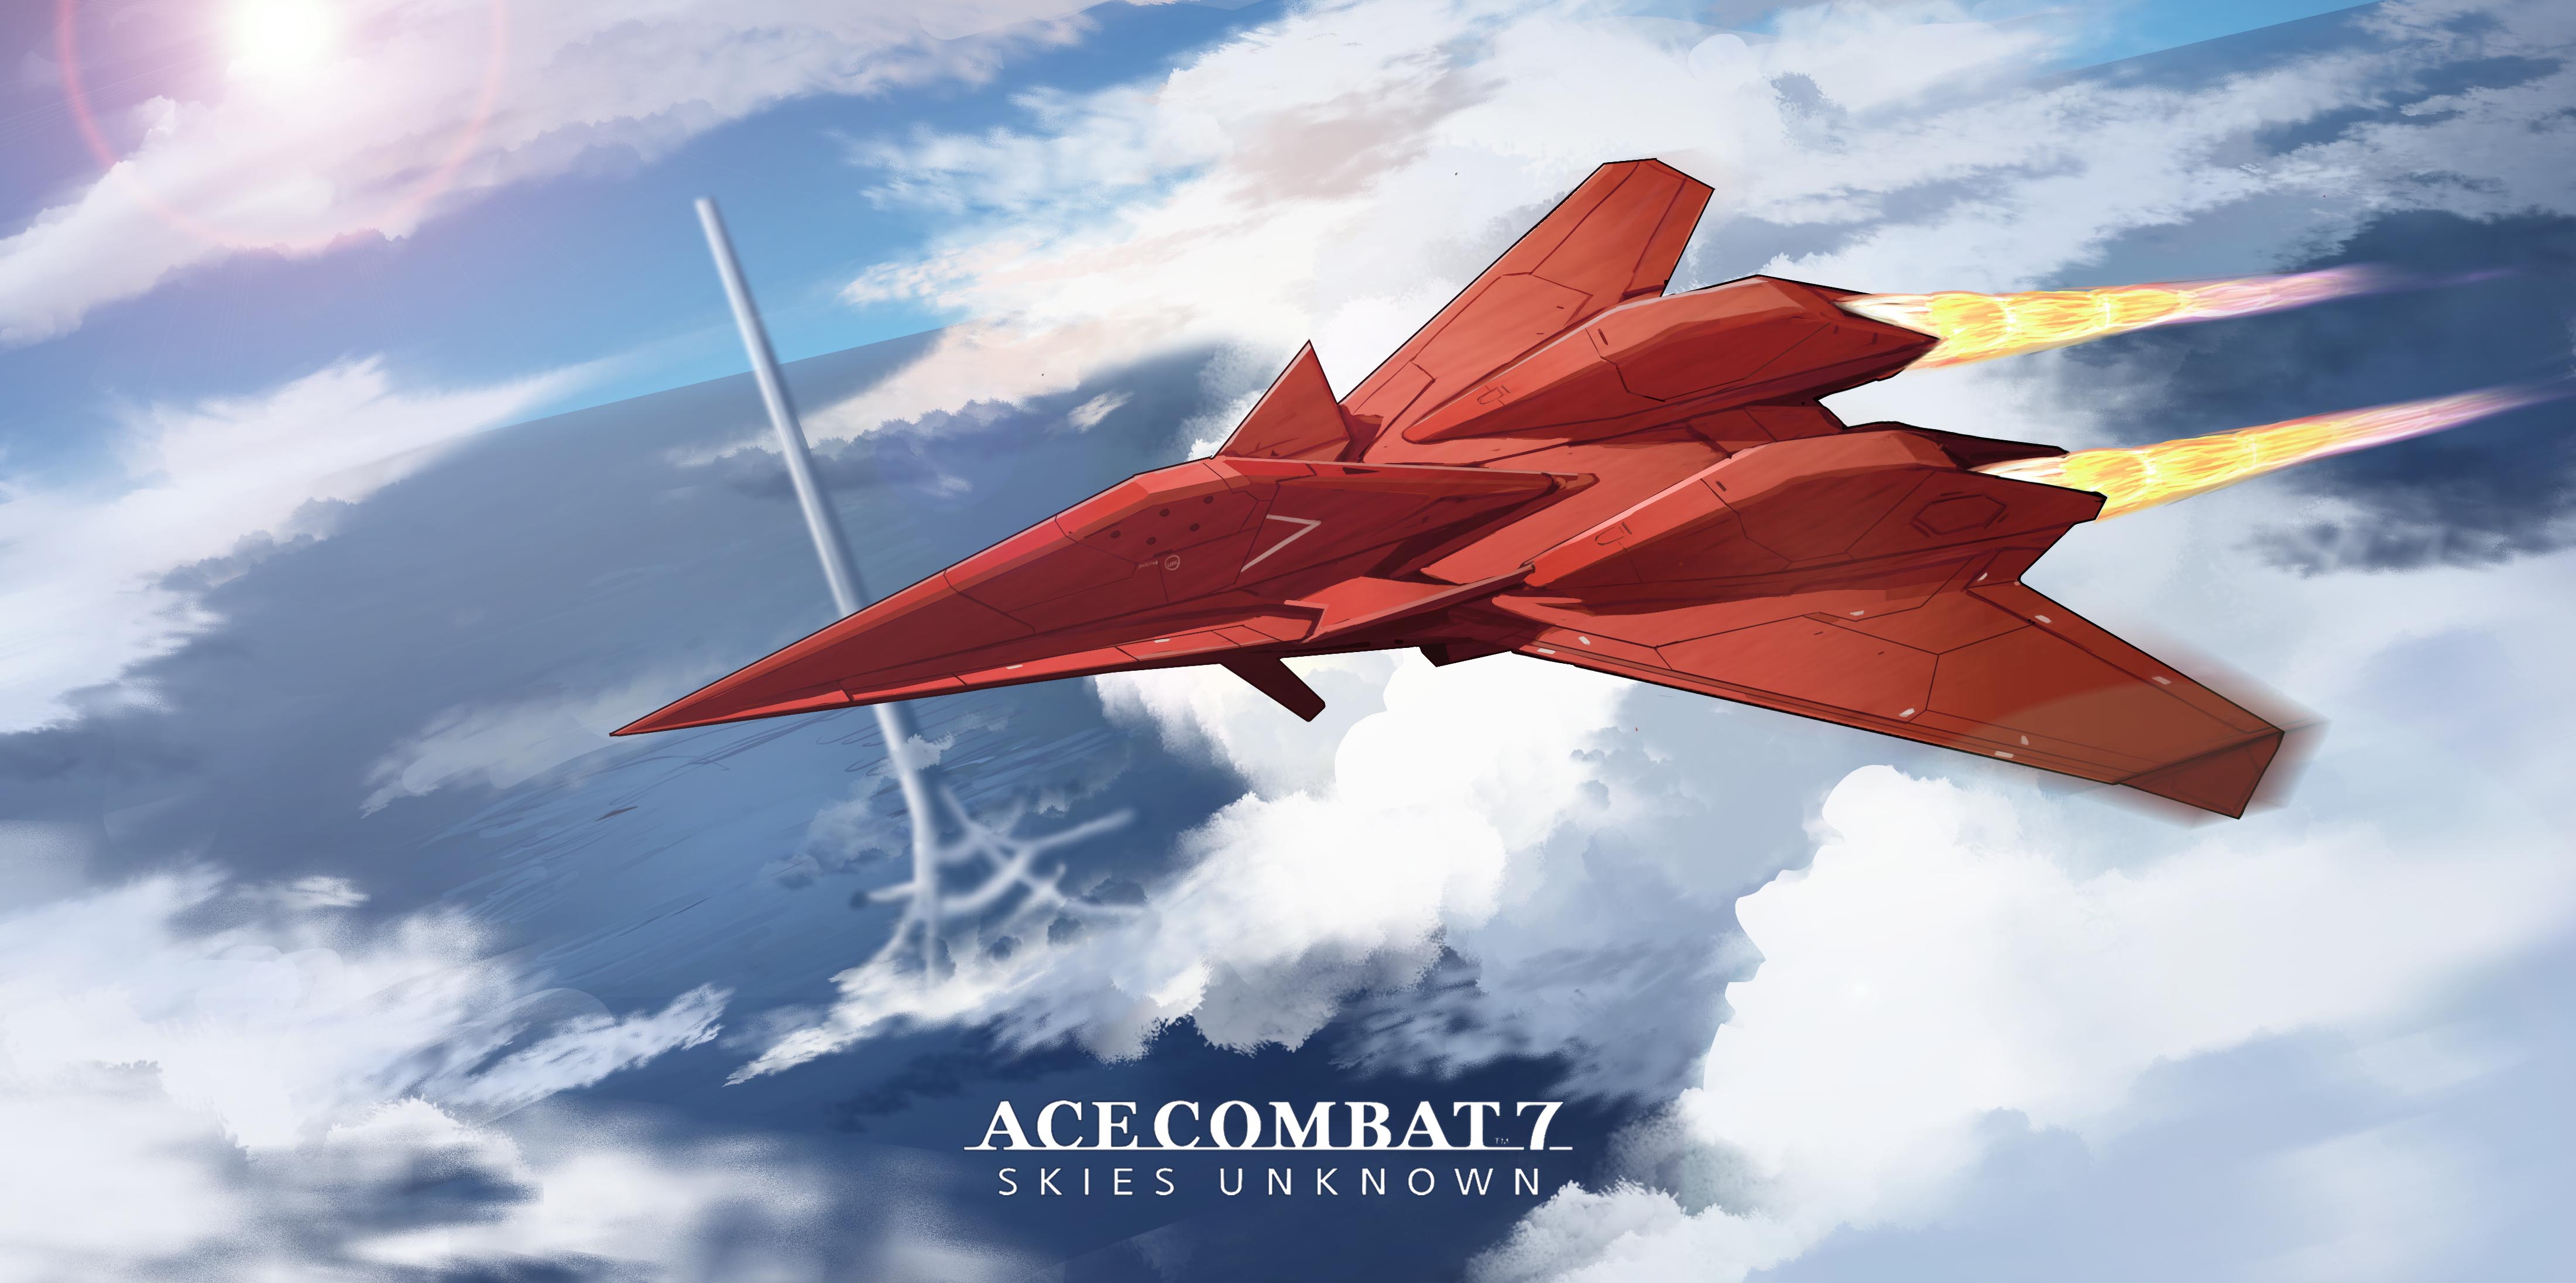 Jet War HD Ace Combat 7 Skies Unknown Wallpapers  HD Wallpapers  ID  102147